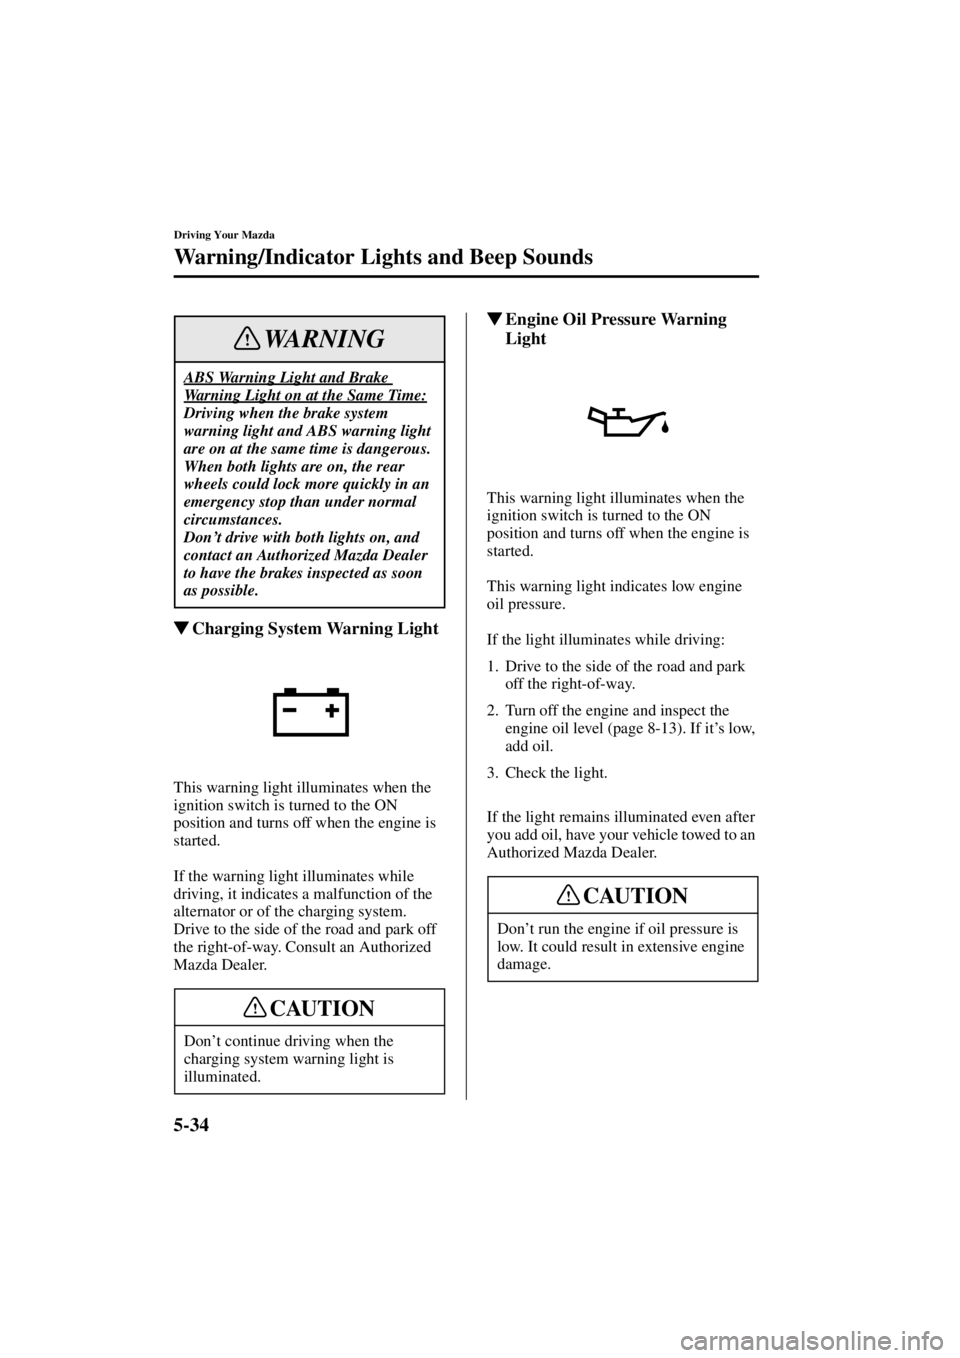 MAZDA MODEL 3 4-DOOR 2004 User Guide 5-34
Driving Your Mazda
Warning/Indicator Lights and Beep Sounds
Form No. 8S18-EA-03I
Charging System Warning Light
This warning light illuminates when the 
ignition switch is turned to the ON 
posit